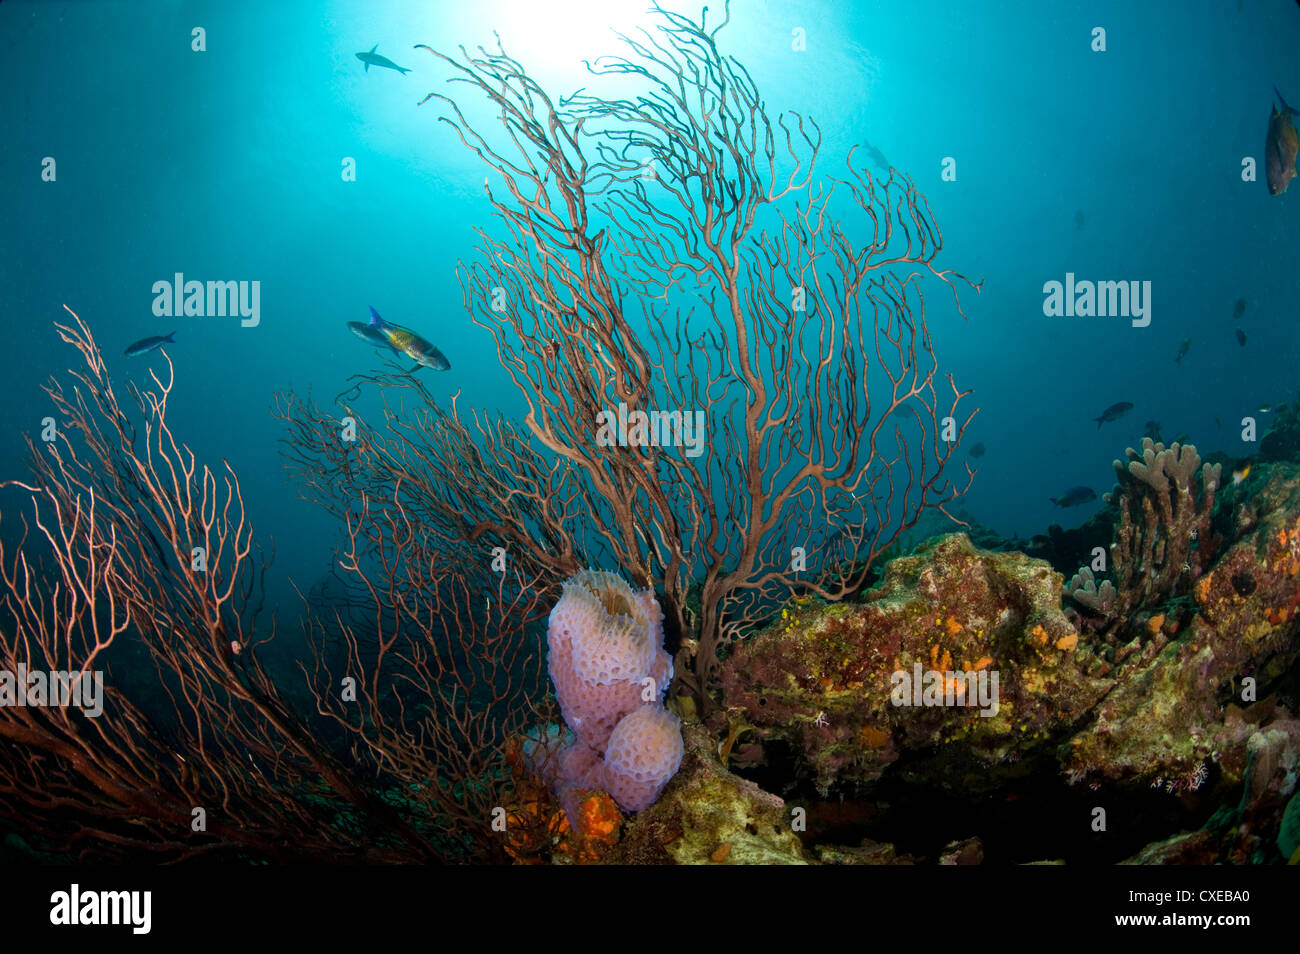 Reef scene with fan coral and vase sponge, St. Lucia, West Indies, Caribbean, Central America Stock Photo